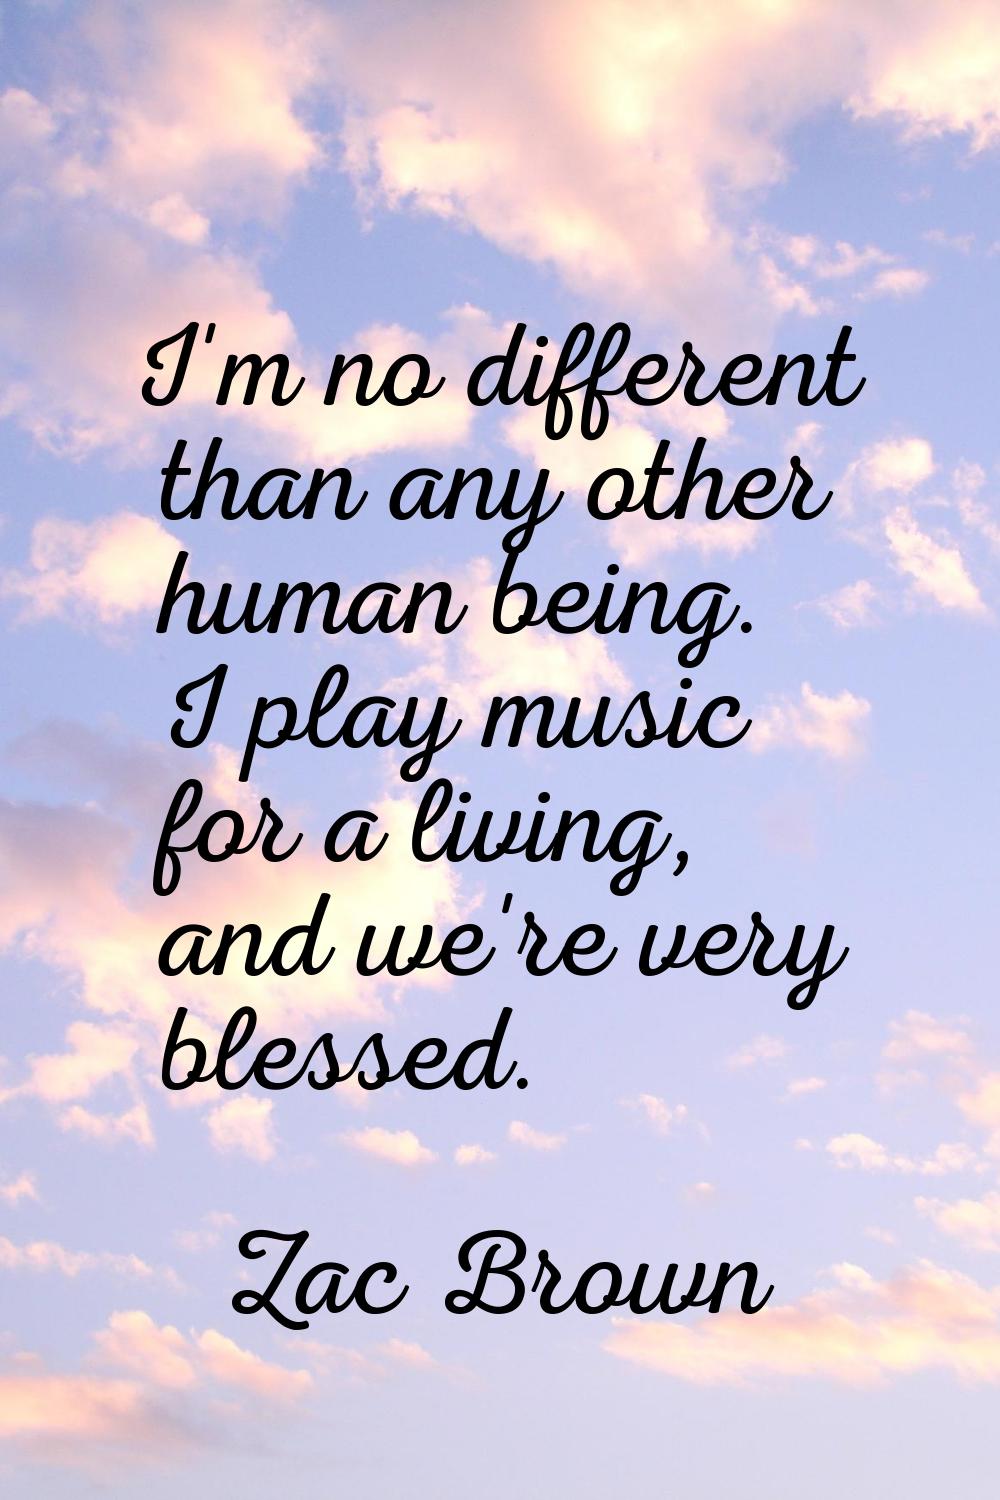 I'm no different than any other human being. I play music for a living, and we're very blessed.